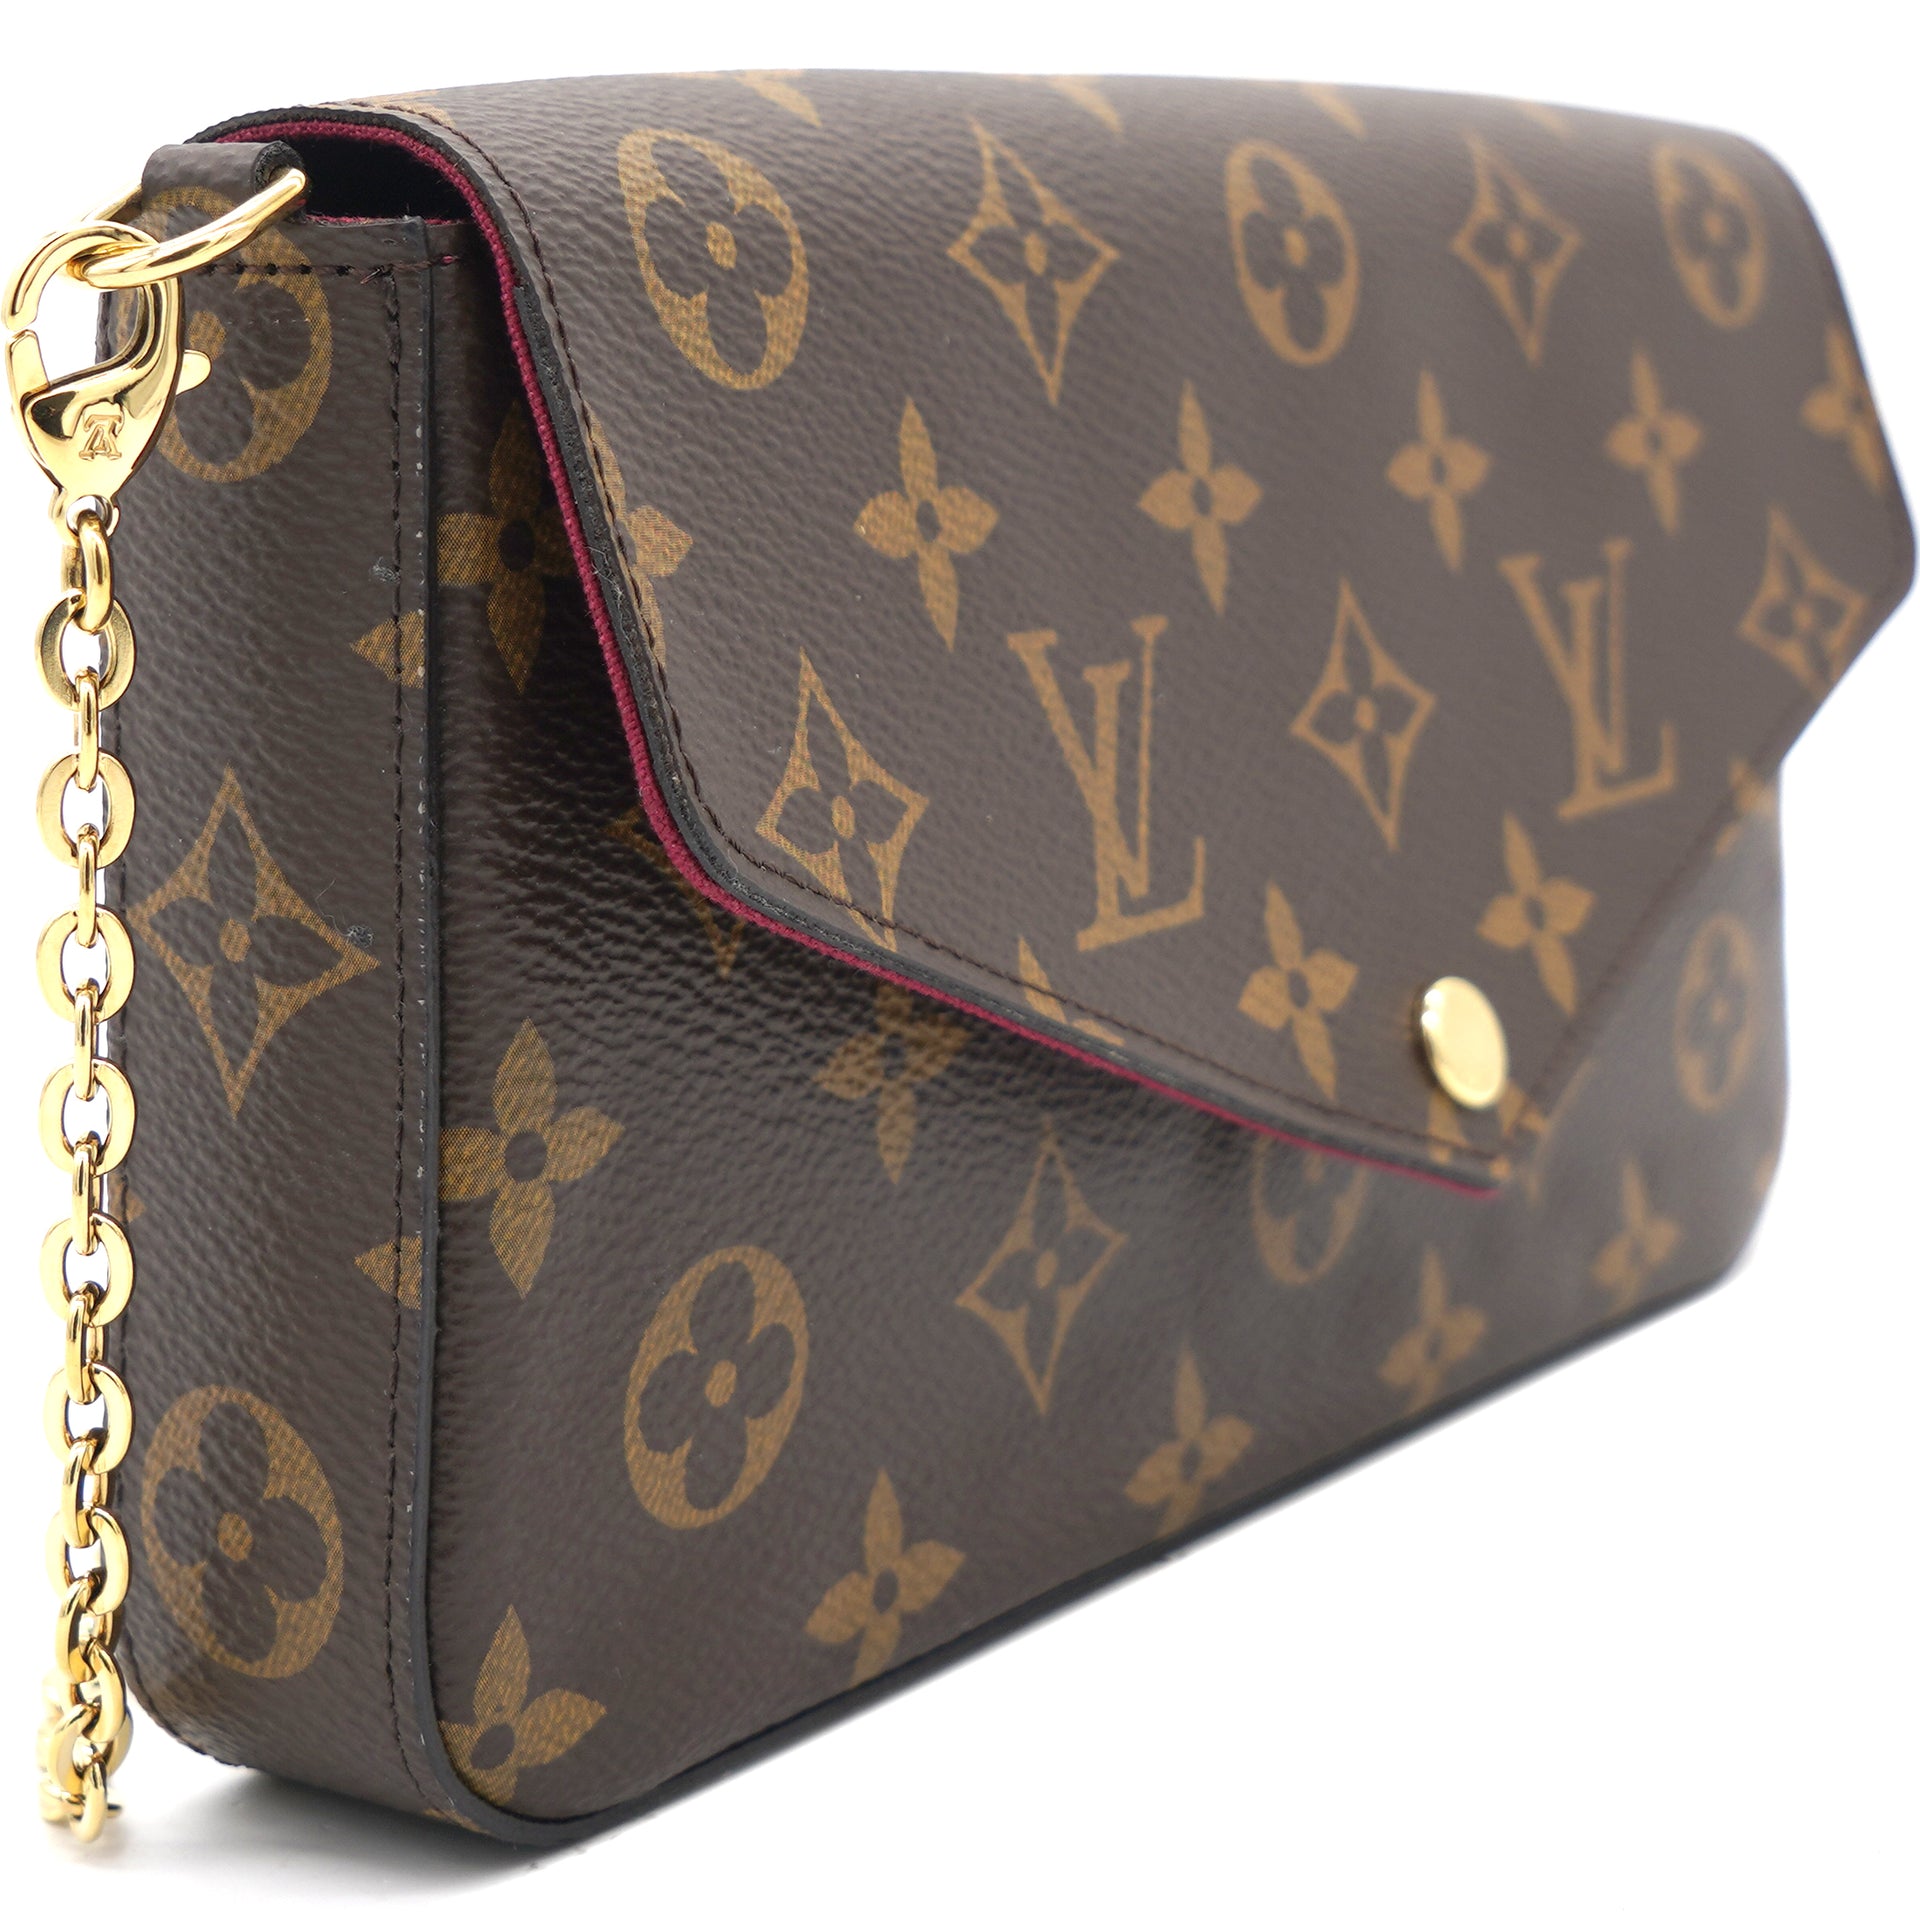 Louis Vuitton FELICIE. LOVE this new small shoulder bag/clutch